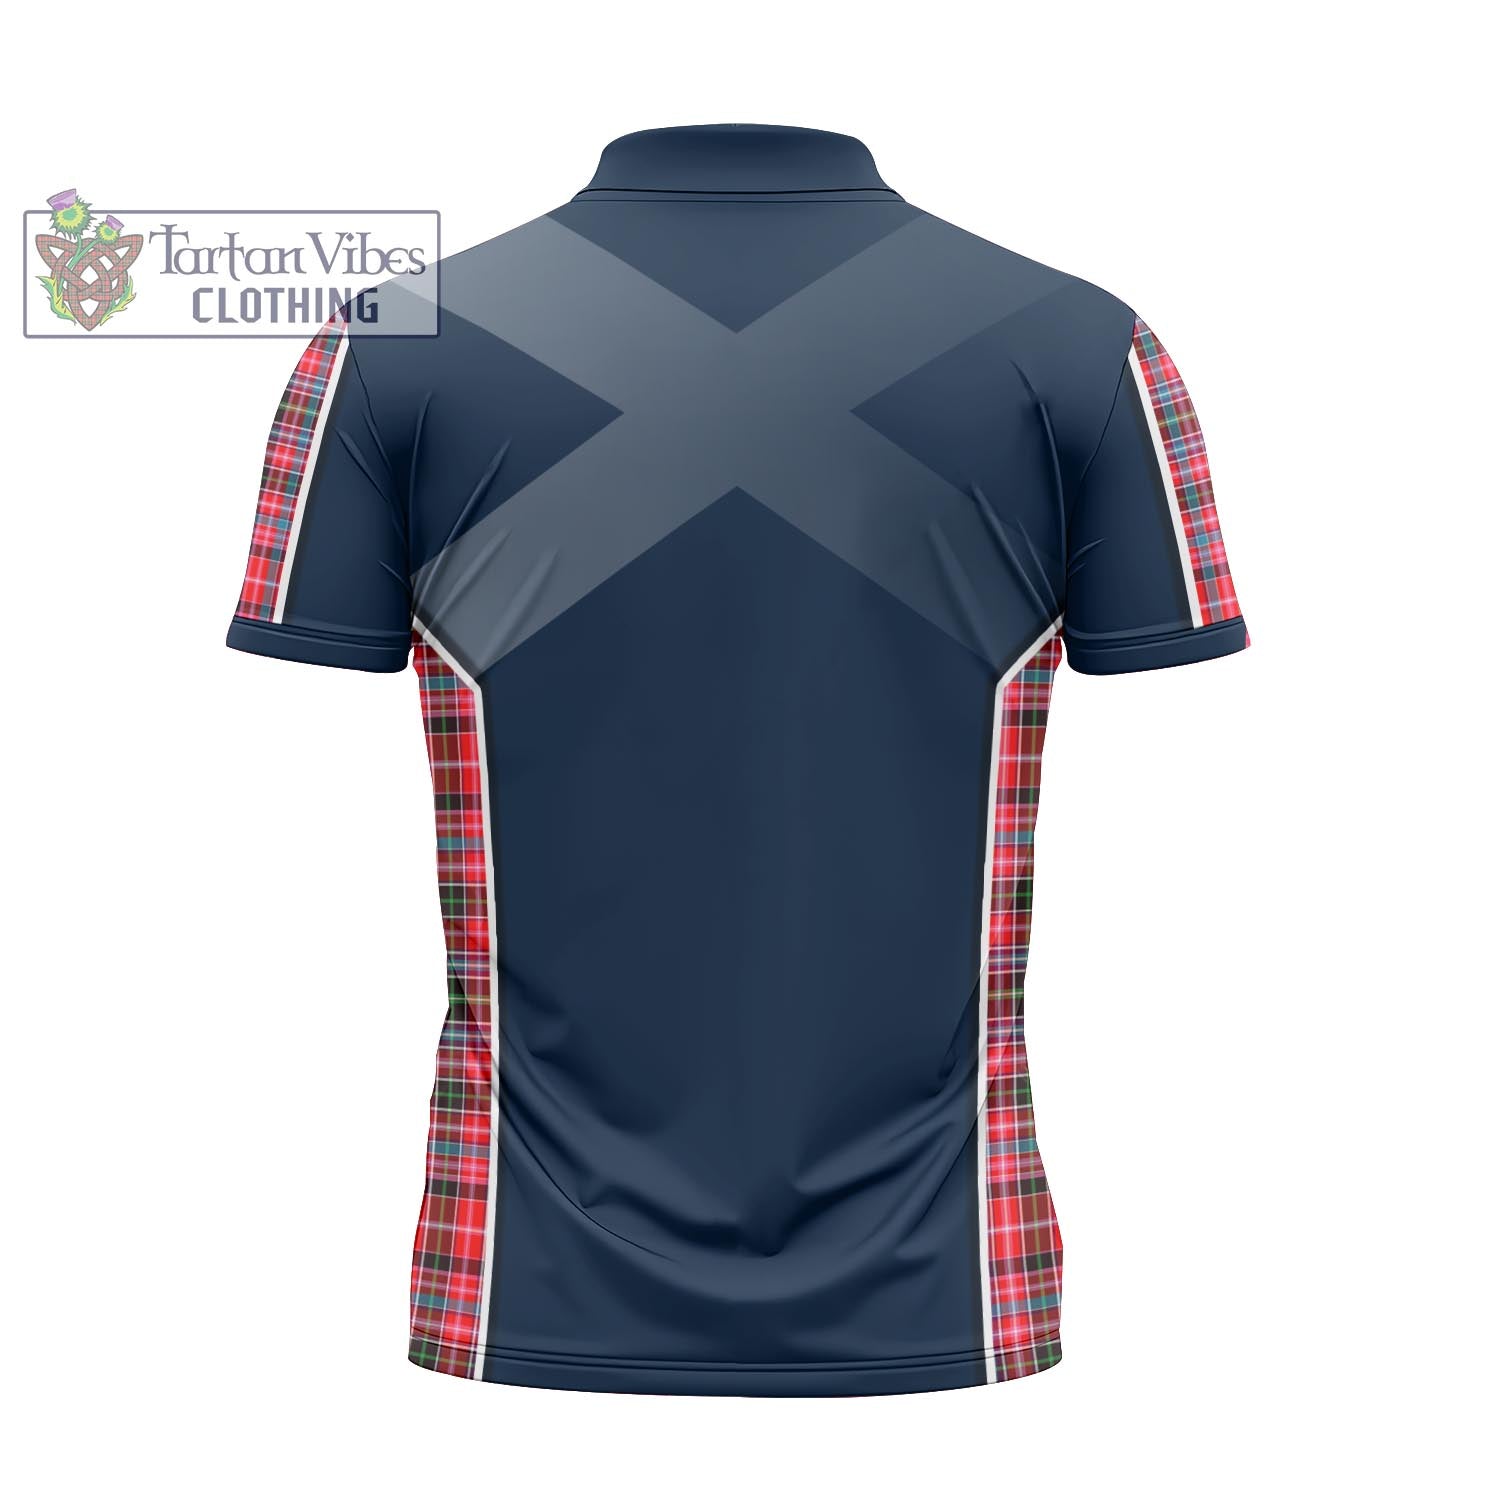 Tartan Vibes Clothing Udny Tartan Zipper Polo Shirt with Family Crest and Scottish Thistle Vibes Sport Style